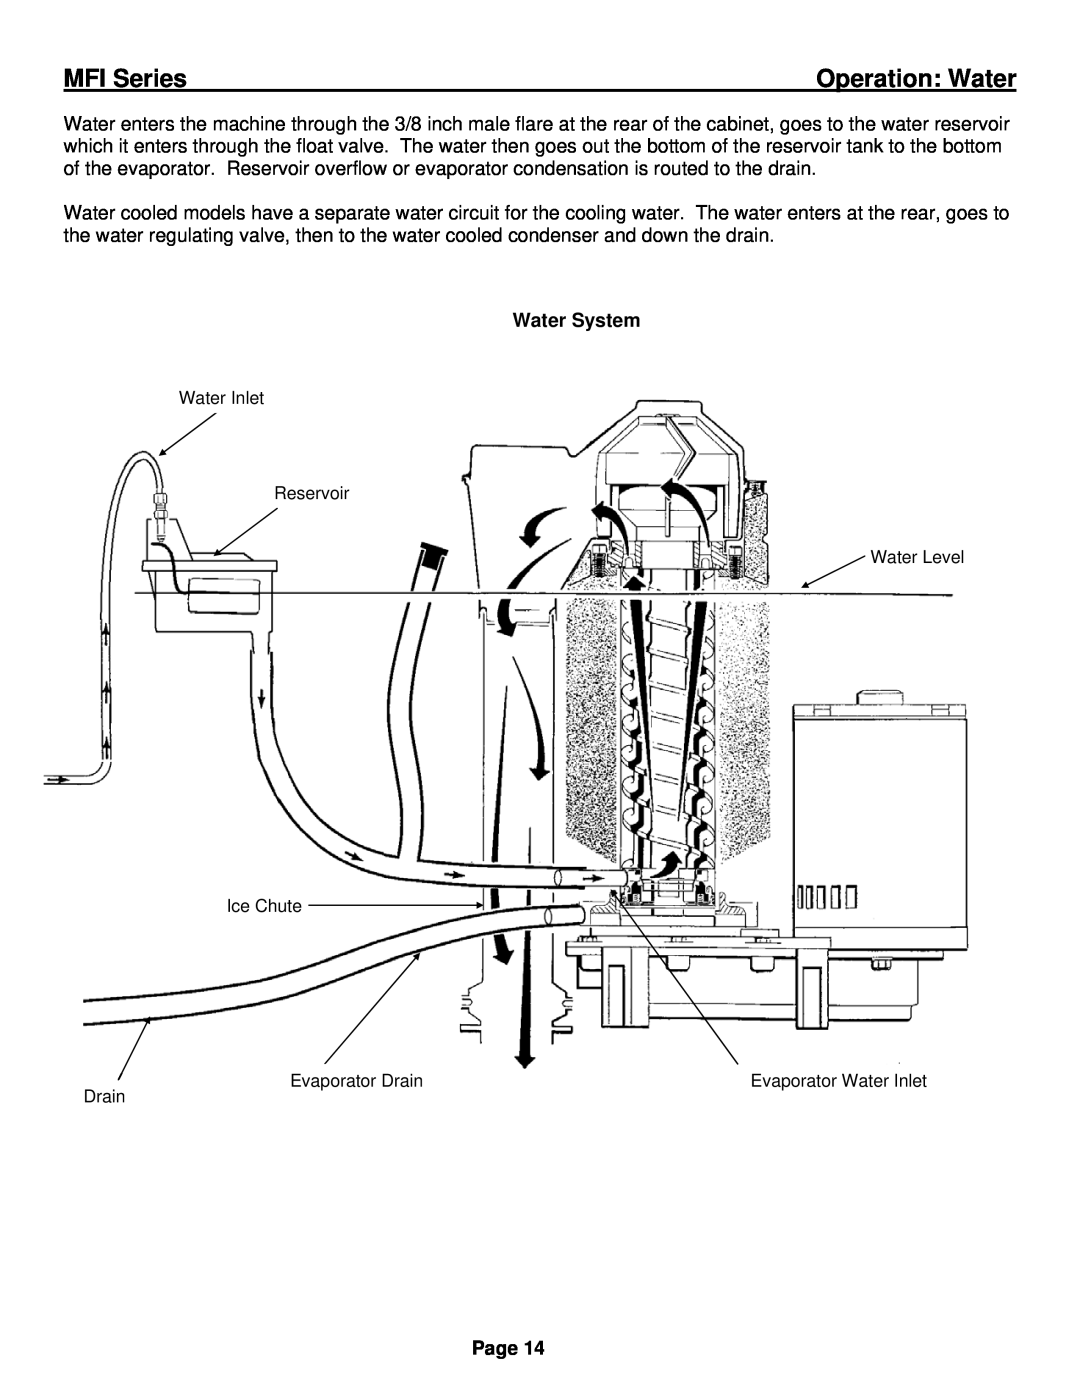 Ice-O-Matic installation manual Operation Water, Water System, MFI Series, Page 